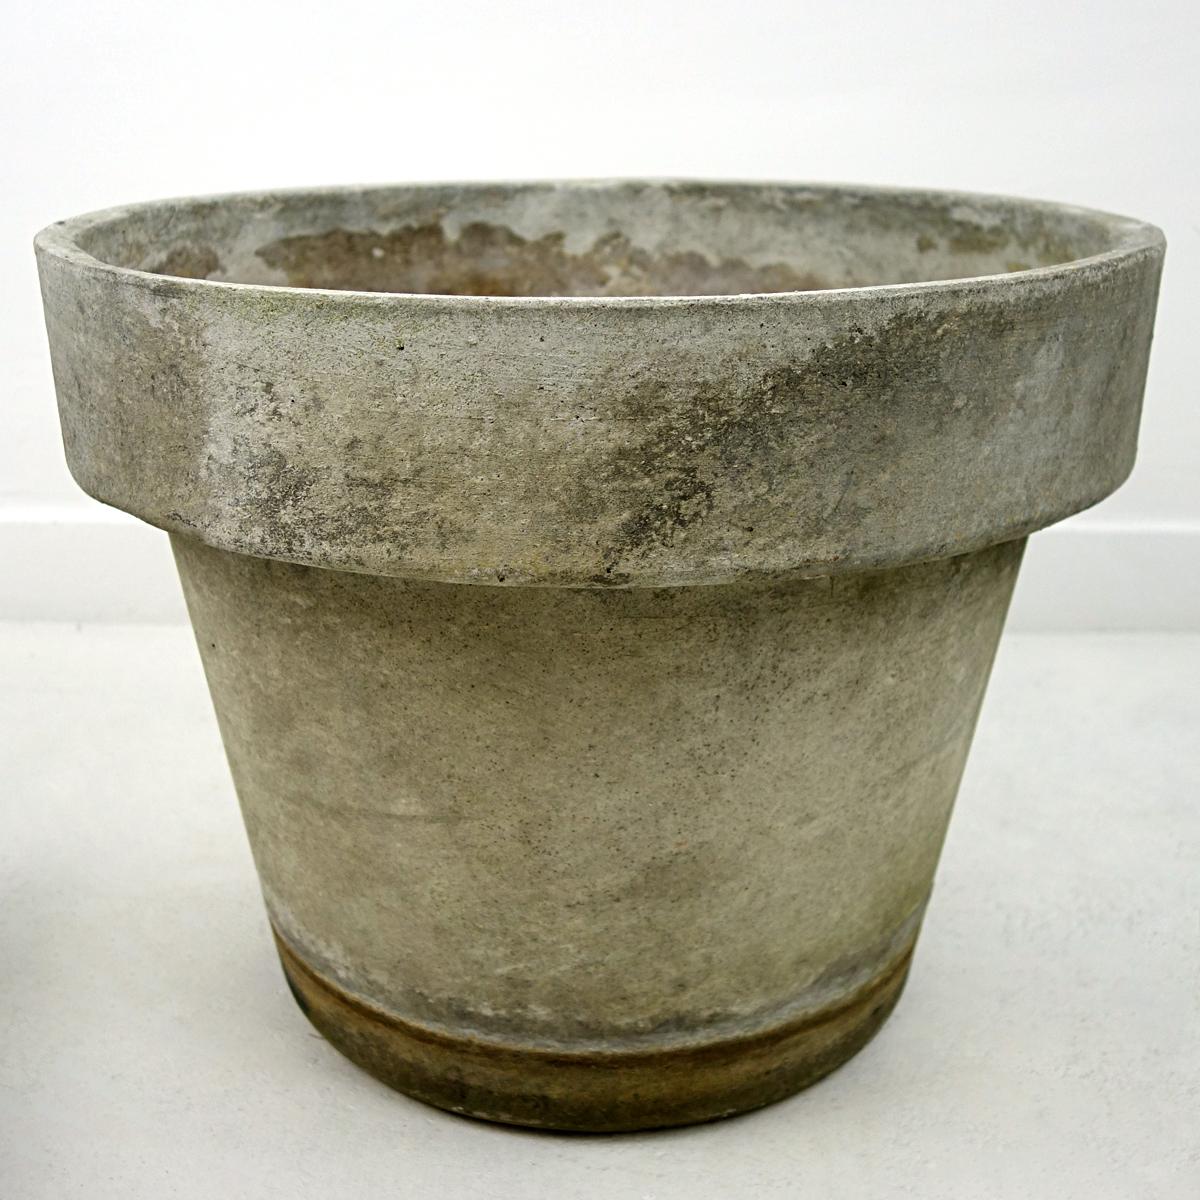 Beautiful planter in the shape of the classical flower pot designed by famous Swiss artist, designer and architect Willy Guhl. 
With its beautiful patina it will make for a pretty picture on your rooftop or patio.